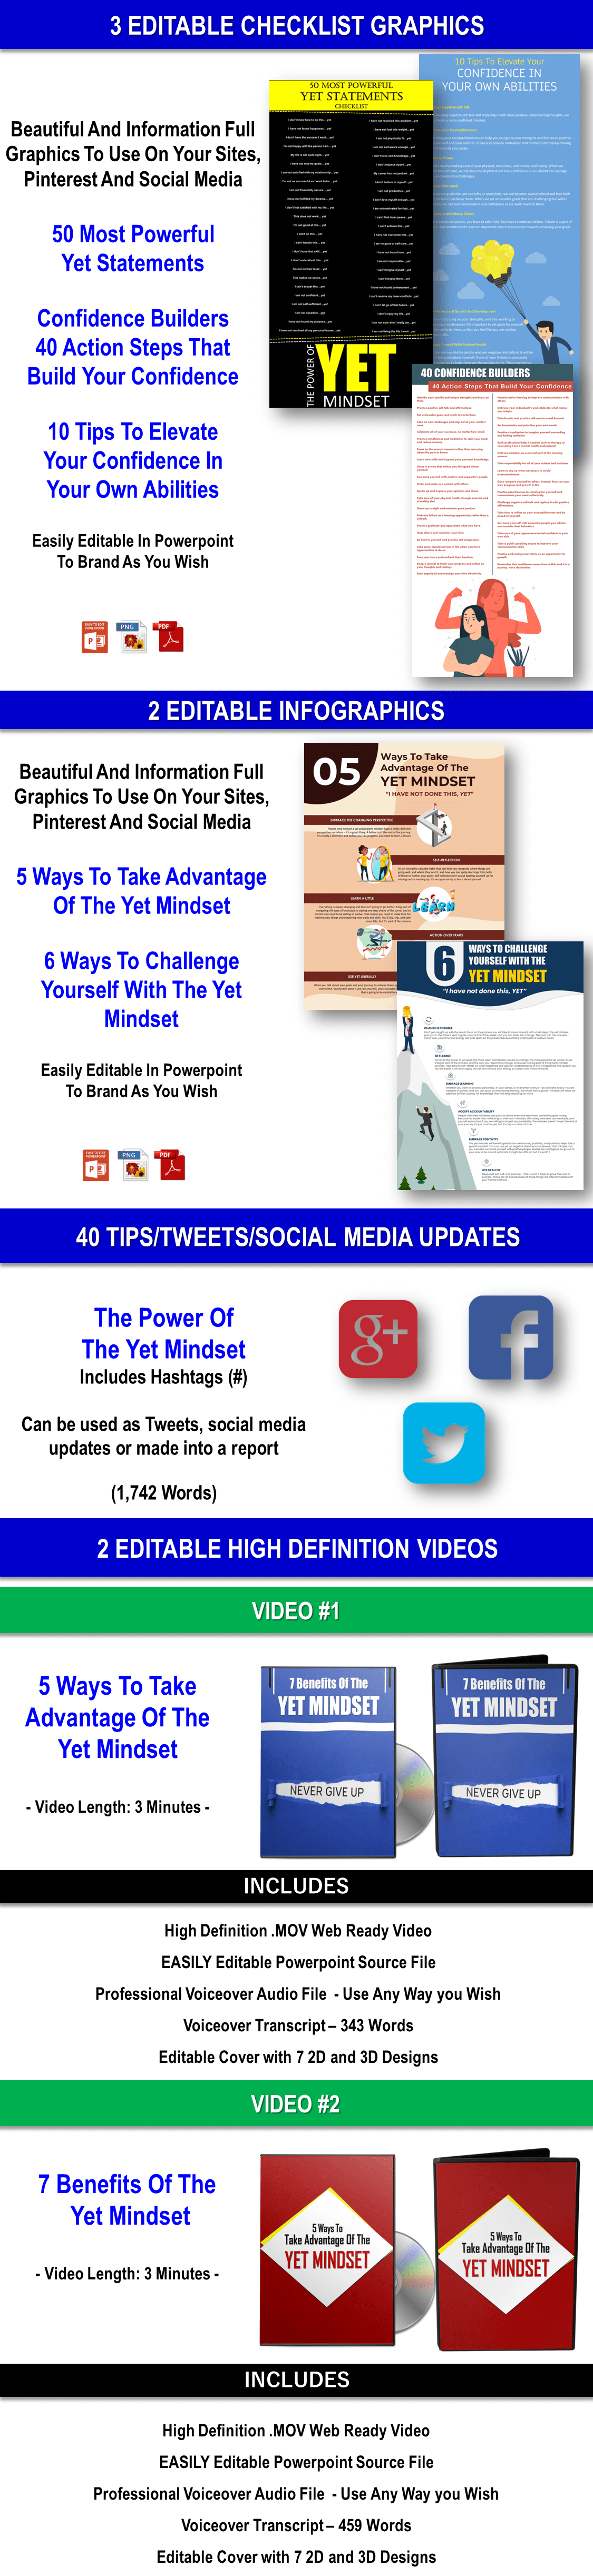 Transform Yourself With The Yet Mindset – “I Can’t Do This, Yet” Giant Content Pack PLR Rights